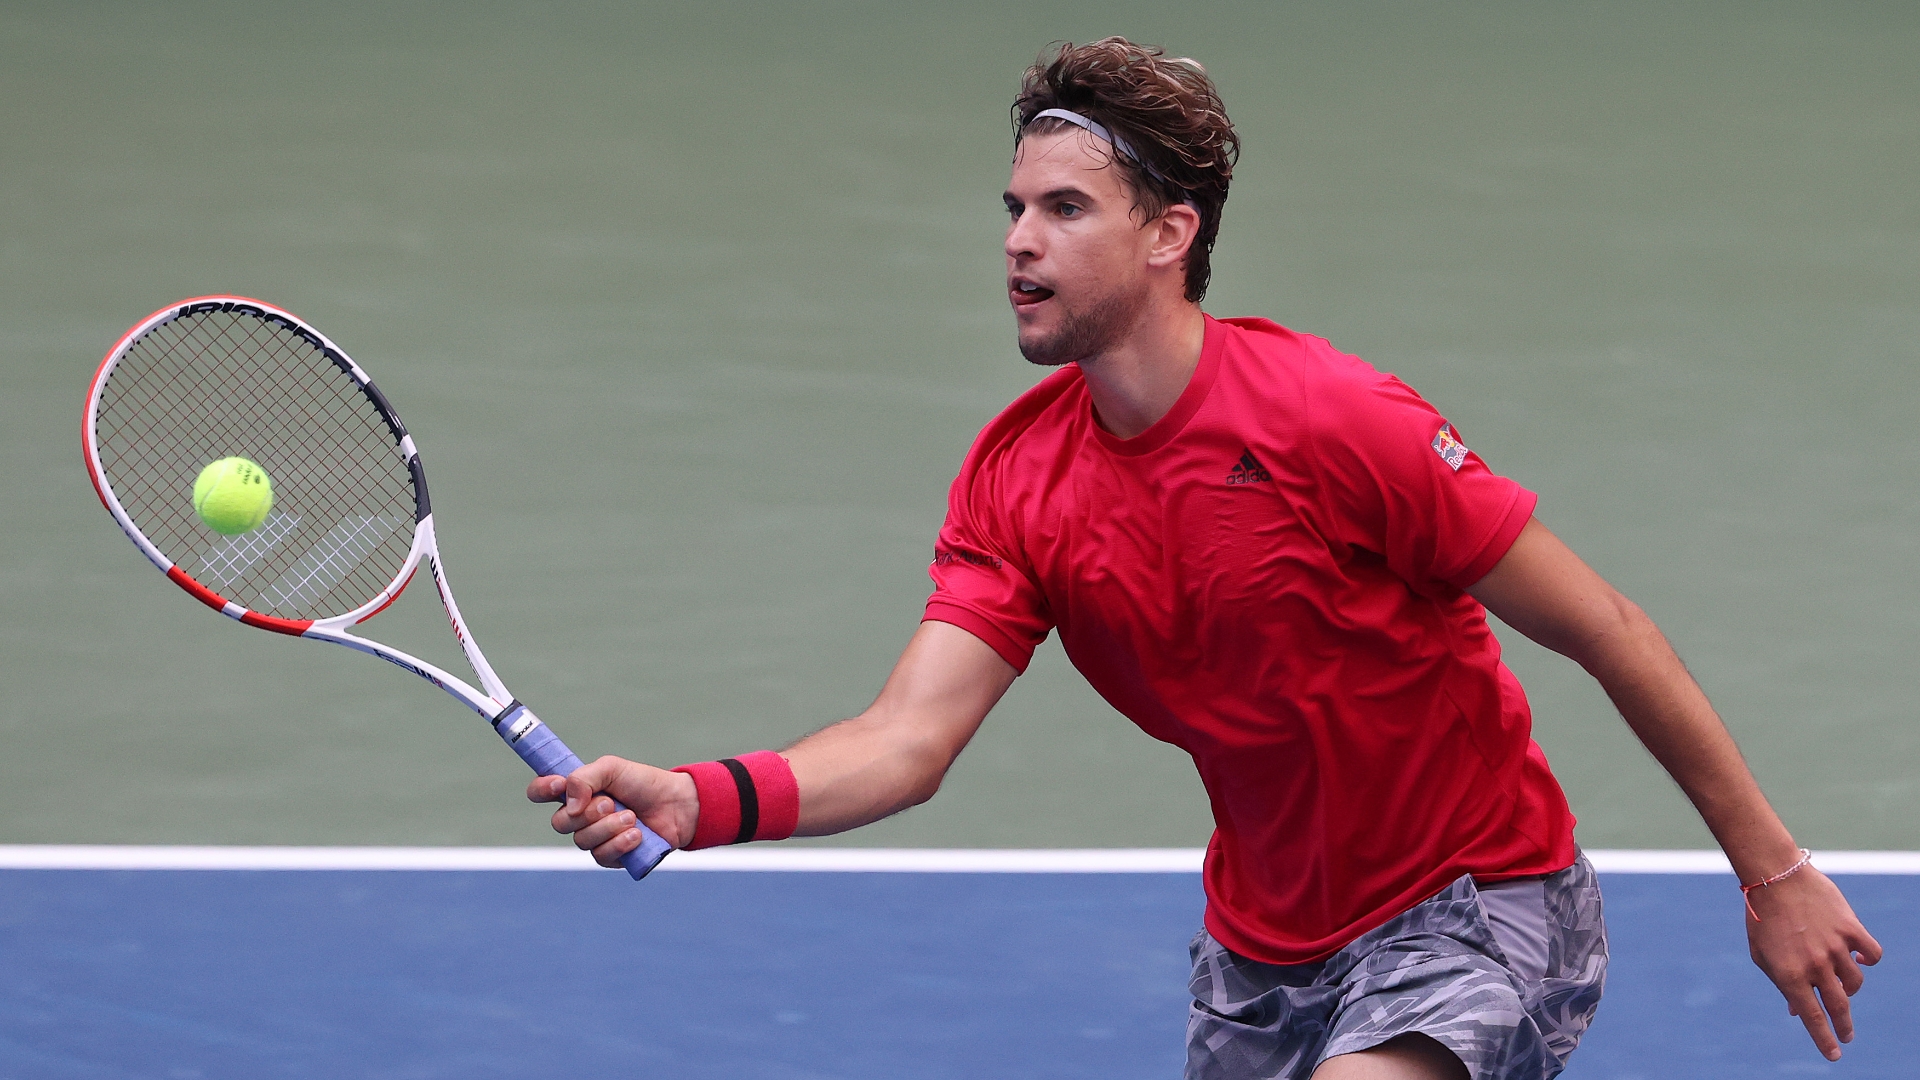 Thiem knocks off Auger-Aliassime in straight sets